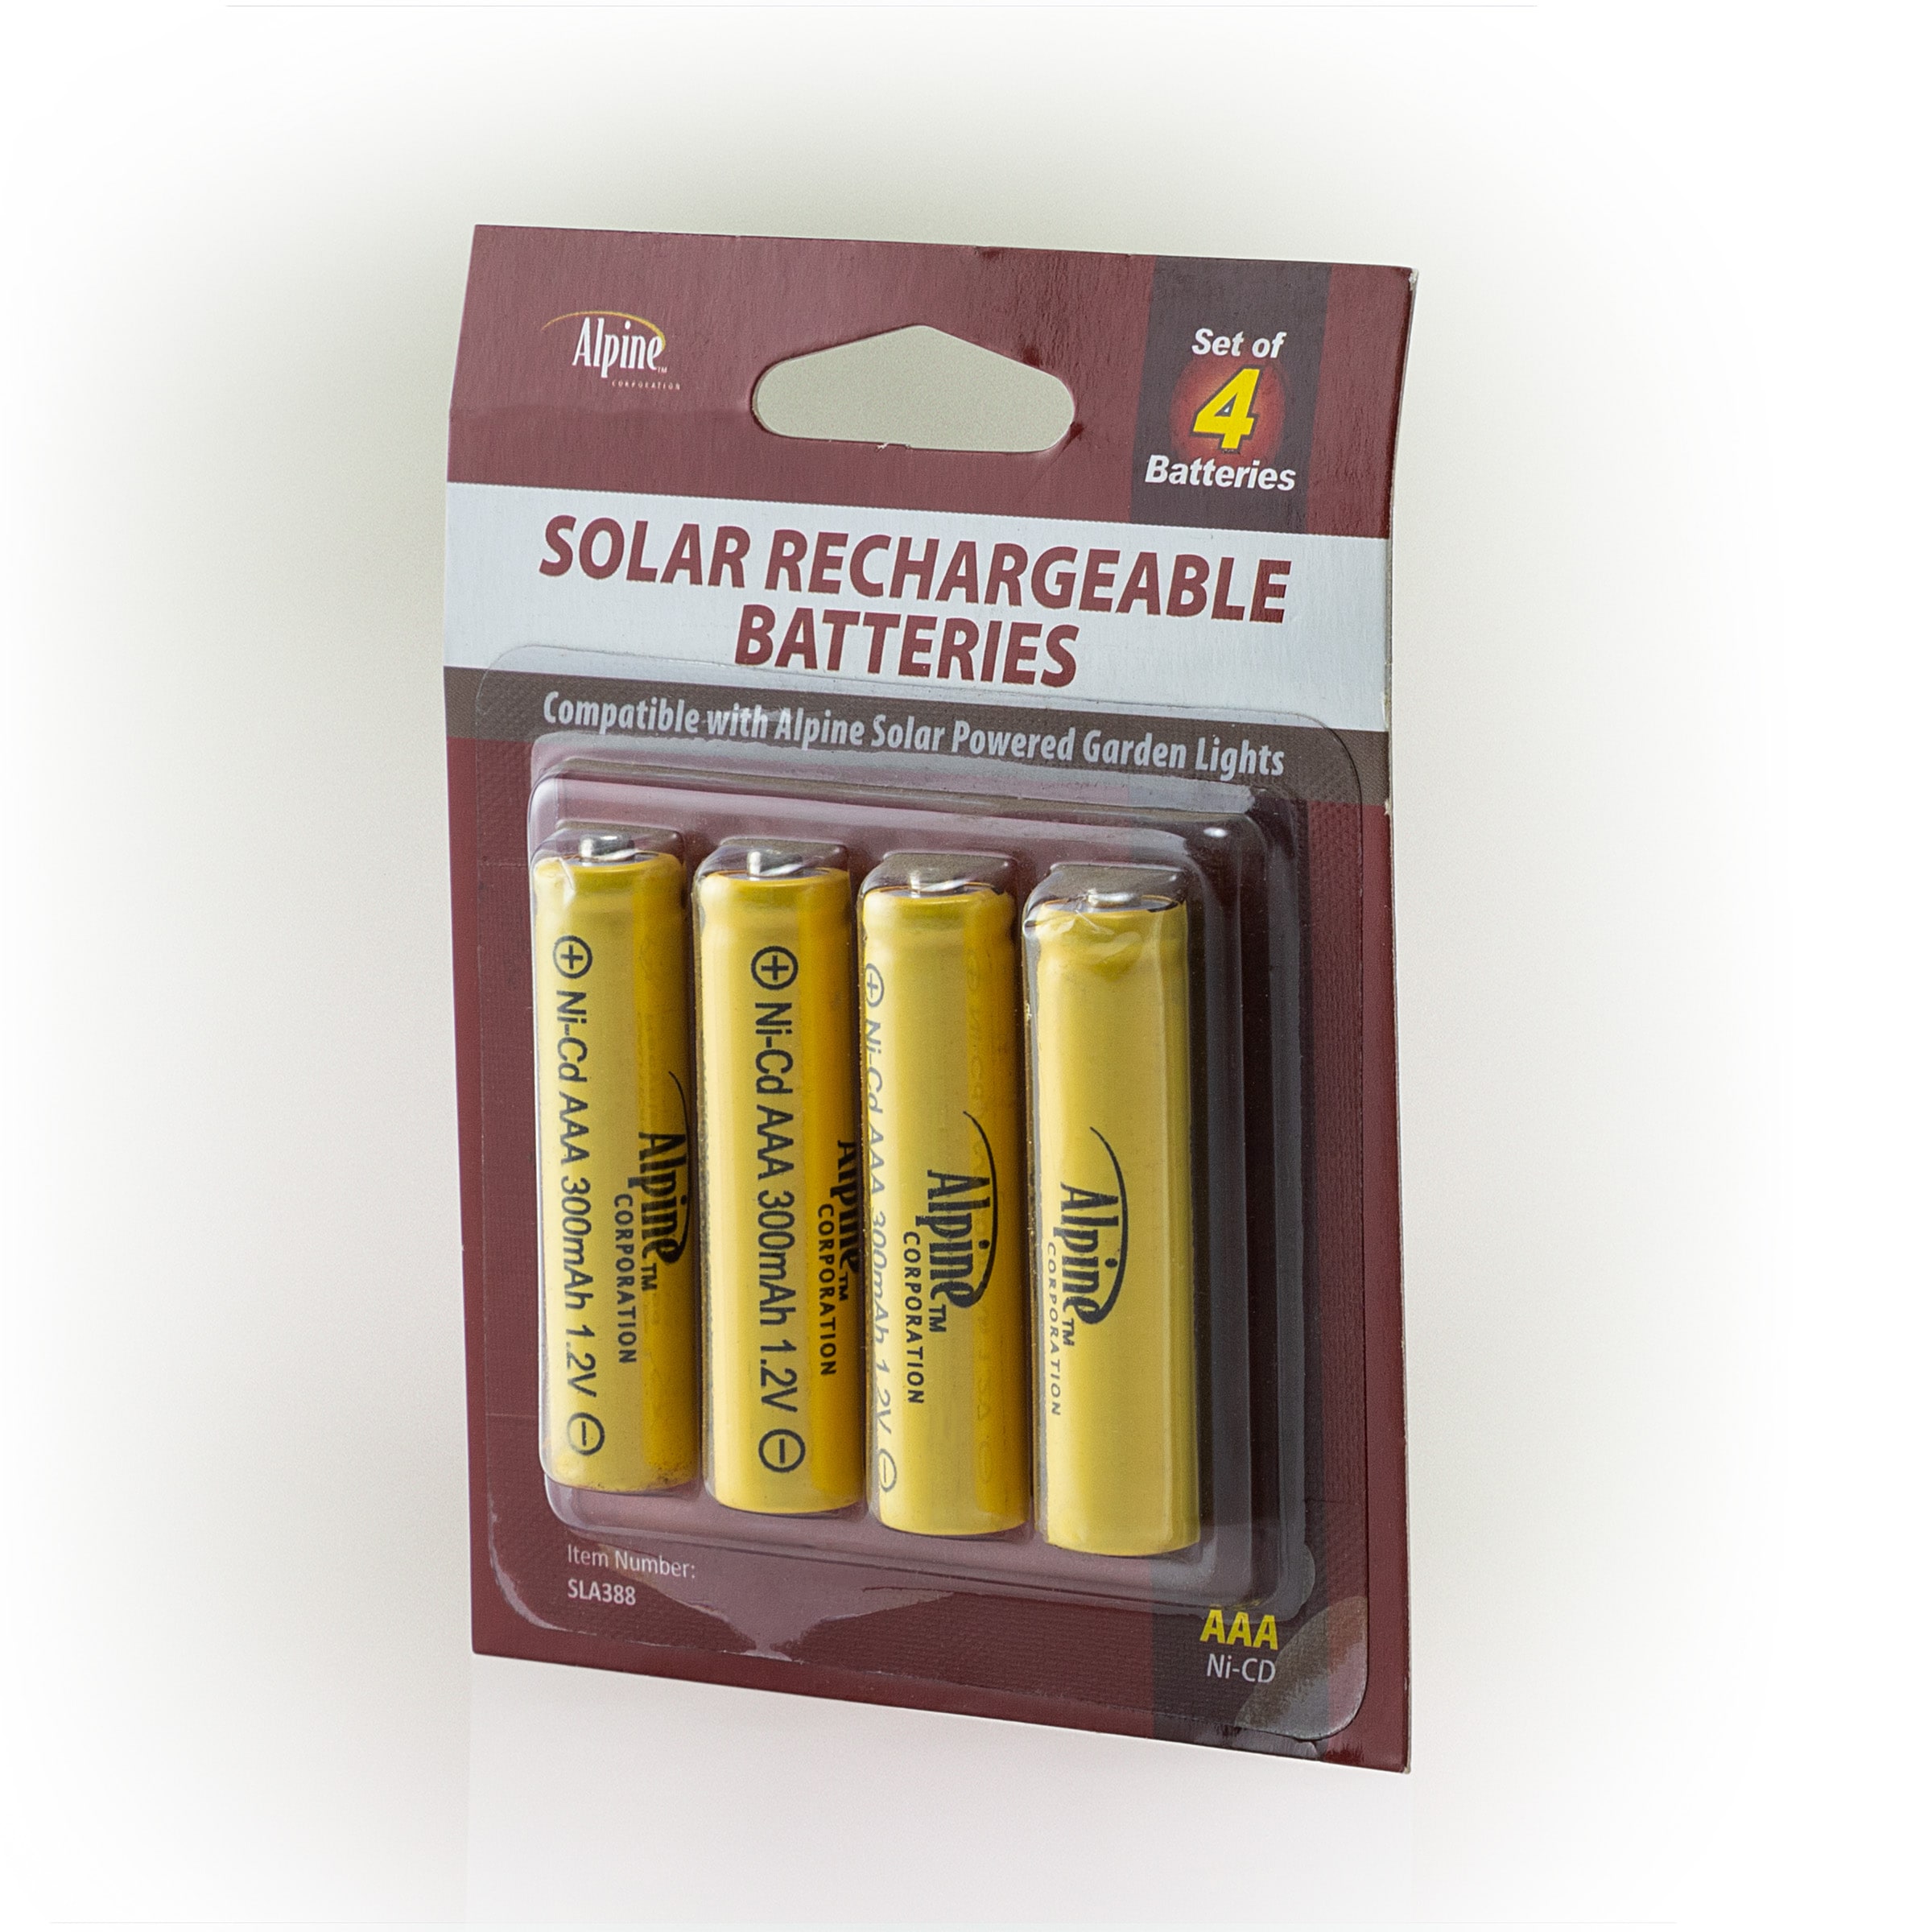 PNP Depot AA USB Rechargeable Lithium Batteries (4-Pack) Rechargeable  Lithium AA Batteries (4-Pack)